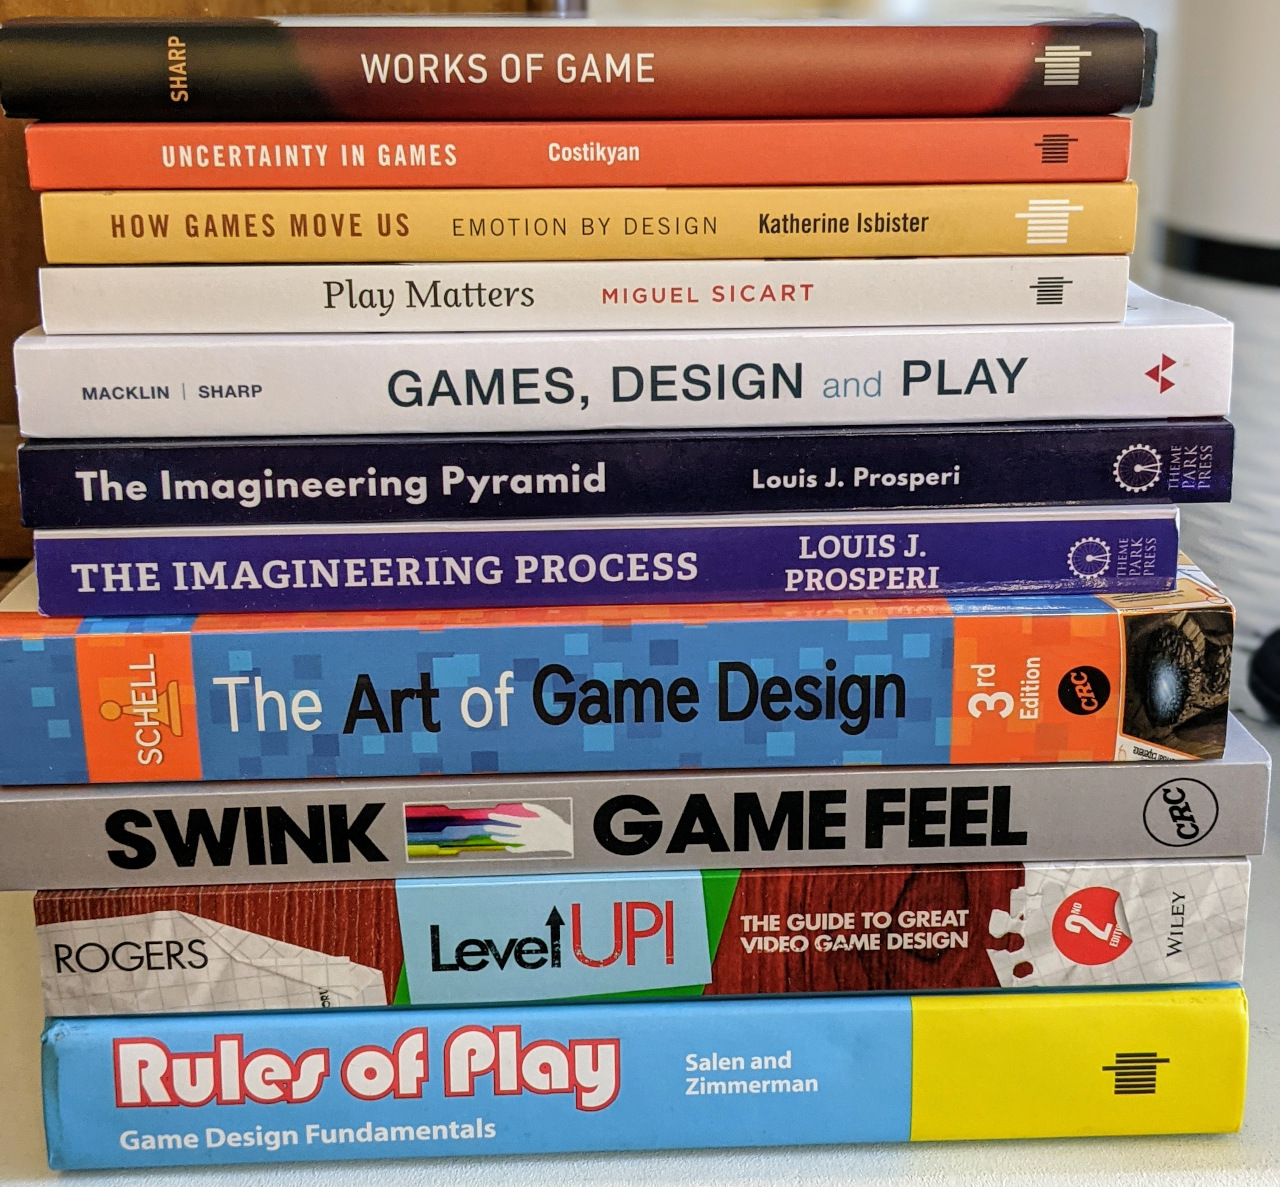 Books on game design and engineering experiences